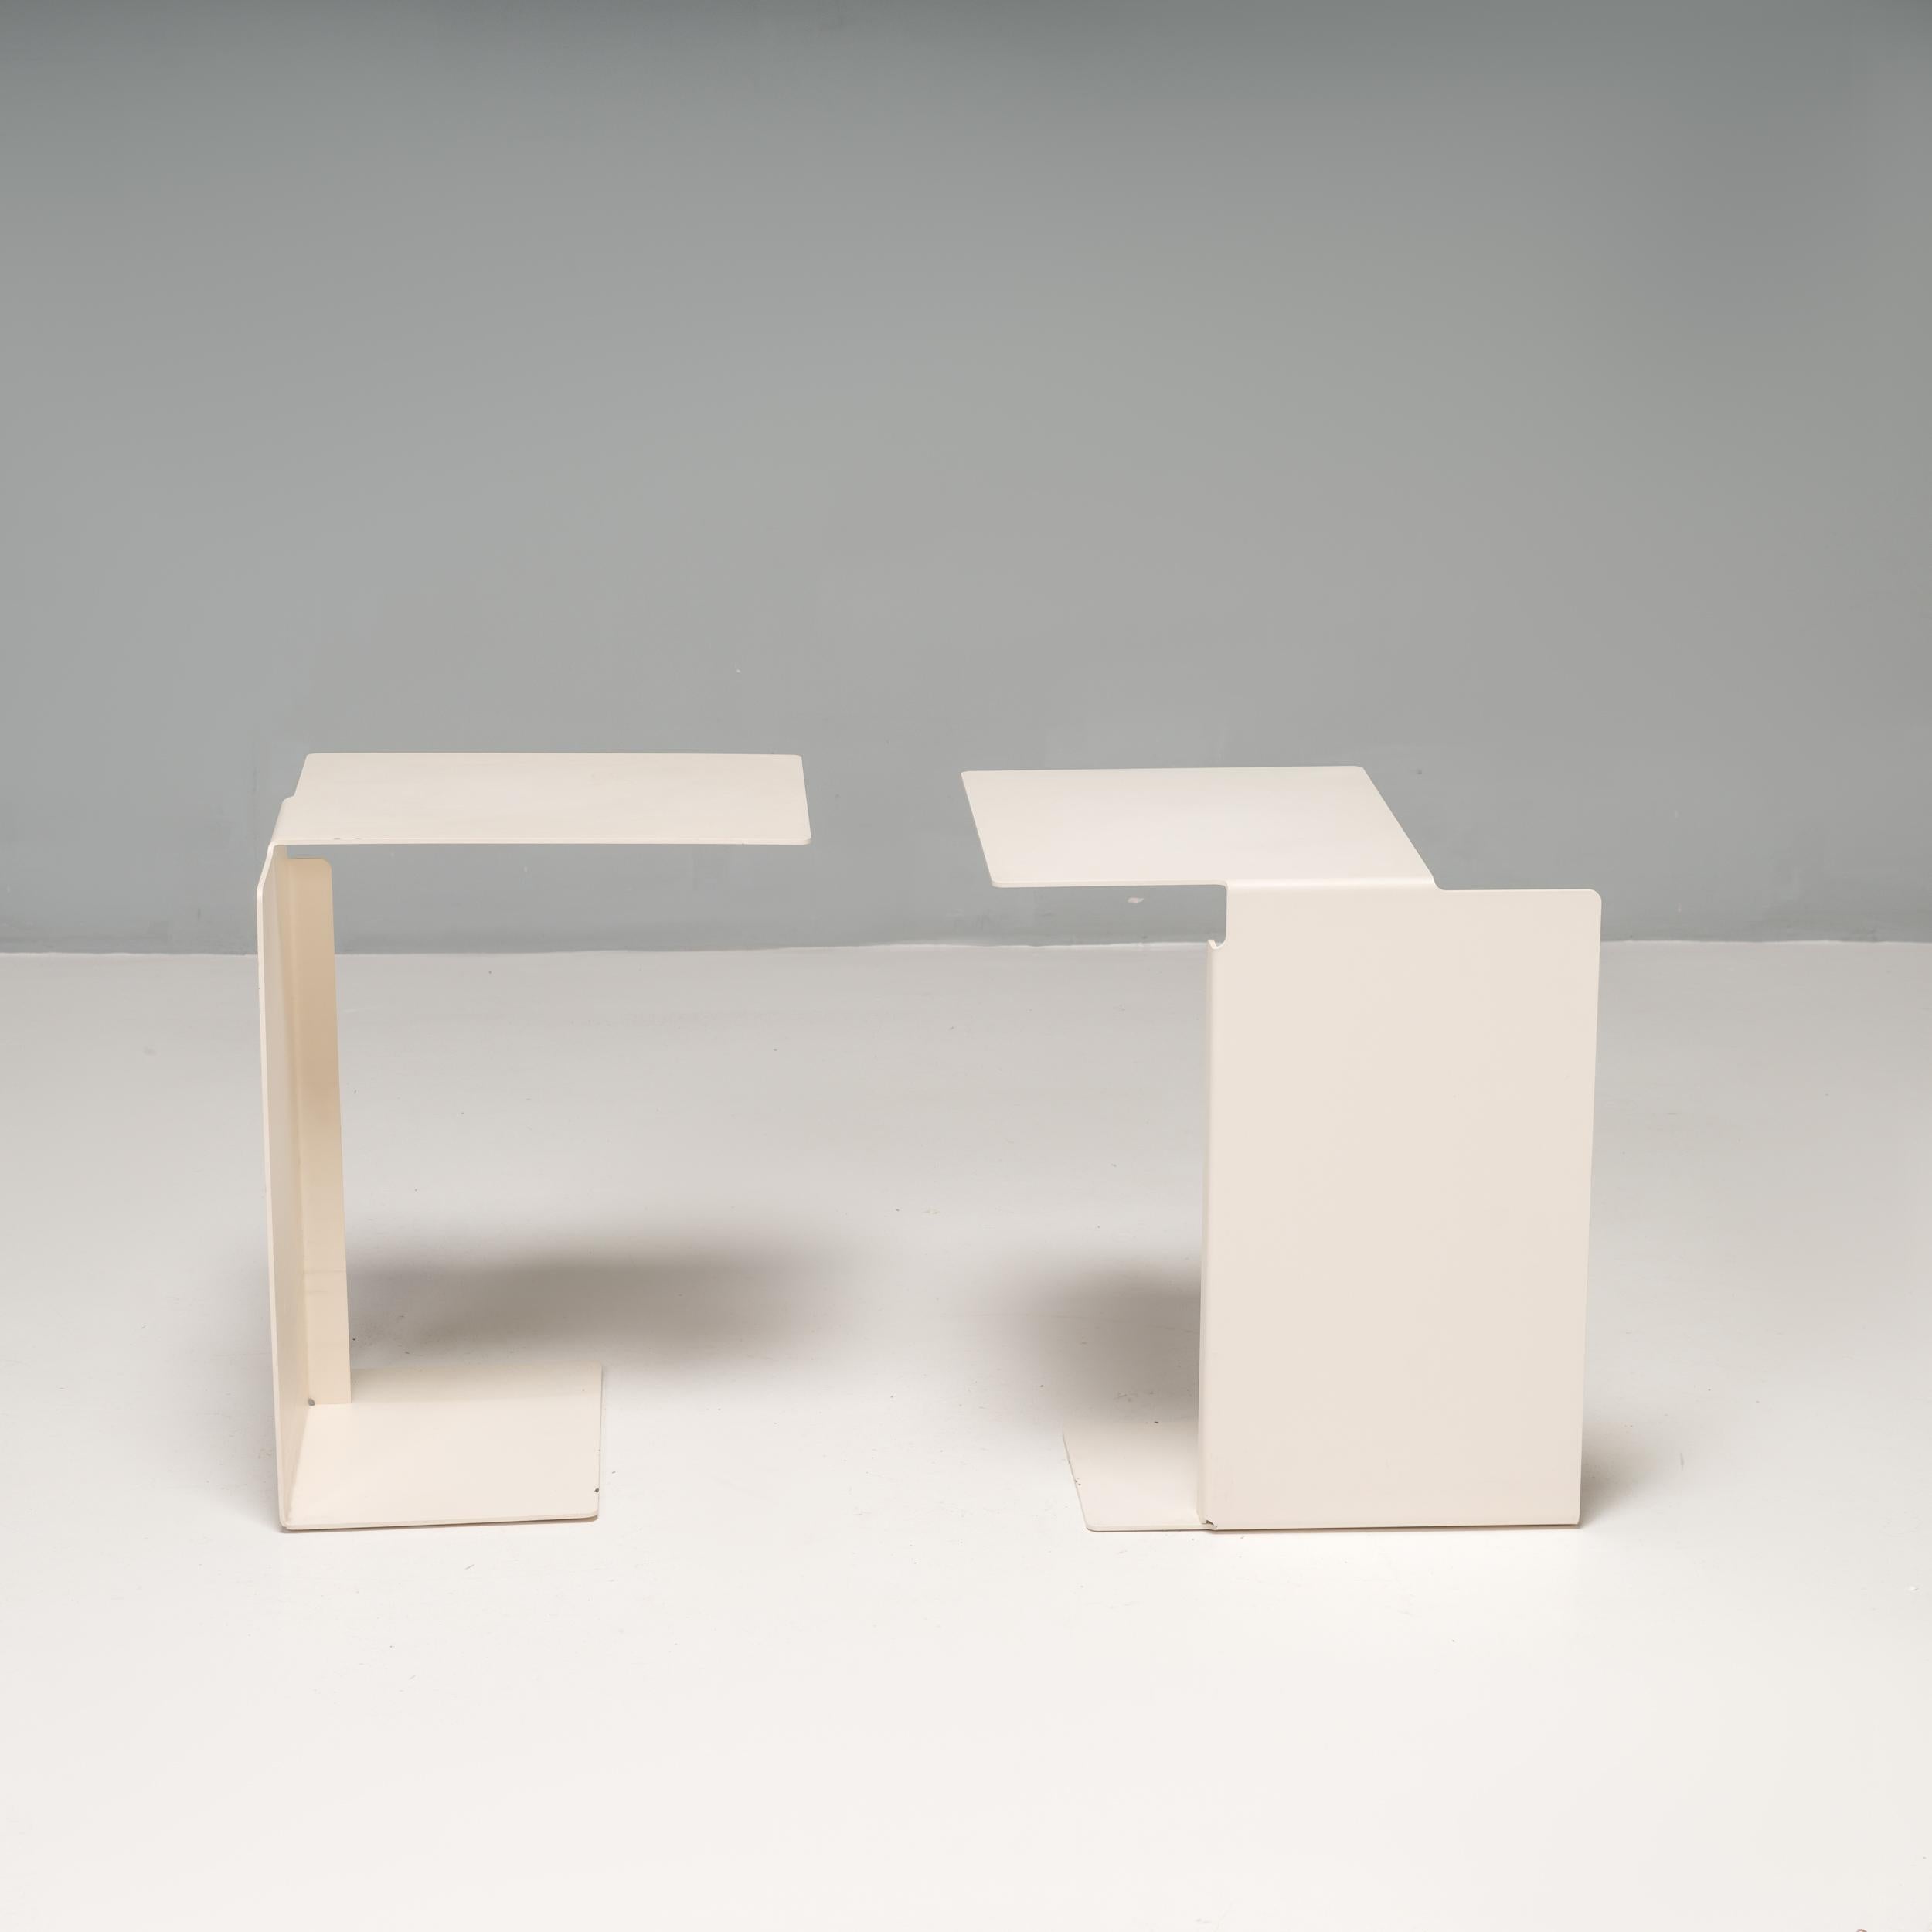 Konstantin Grcic for Classicon Diana B White Side Tables, Set of 2 In Good Condition For Sale In London, GB